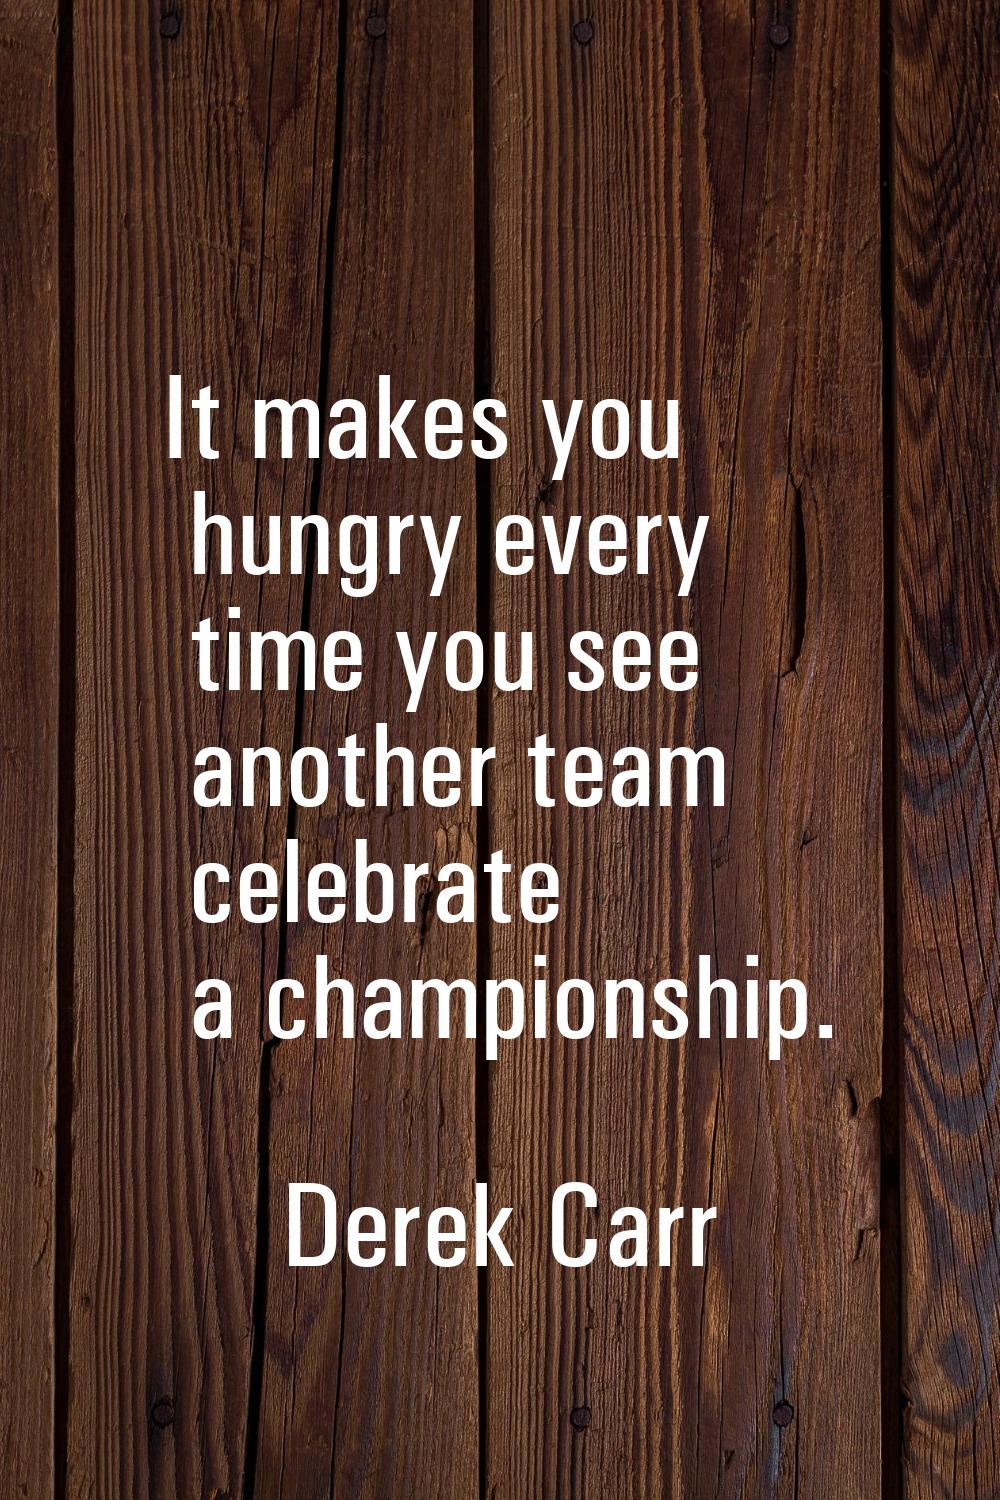 It makes you hungry every time you see another team celebrate a championship.